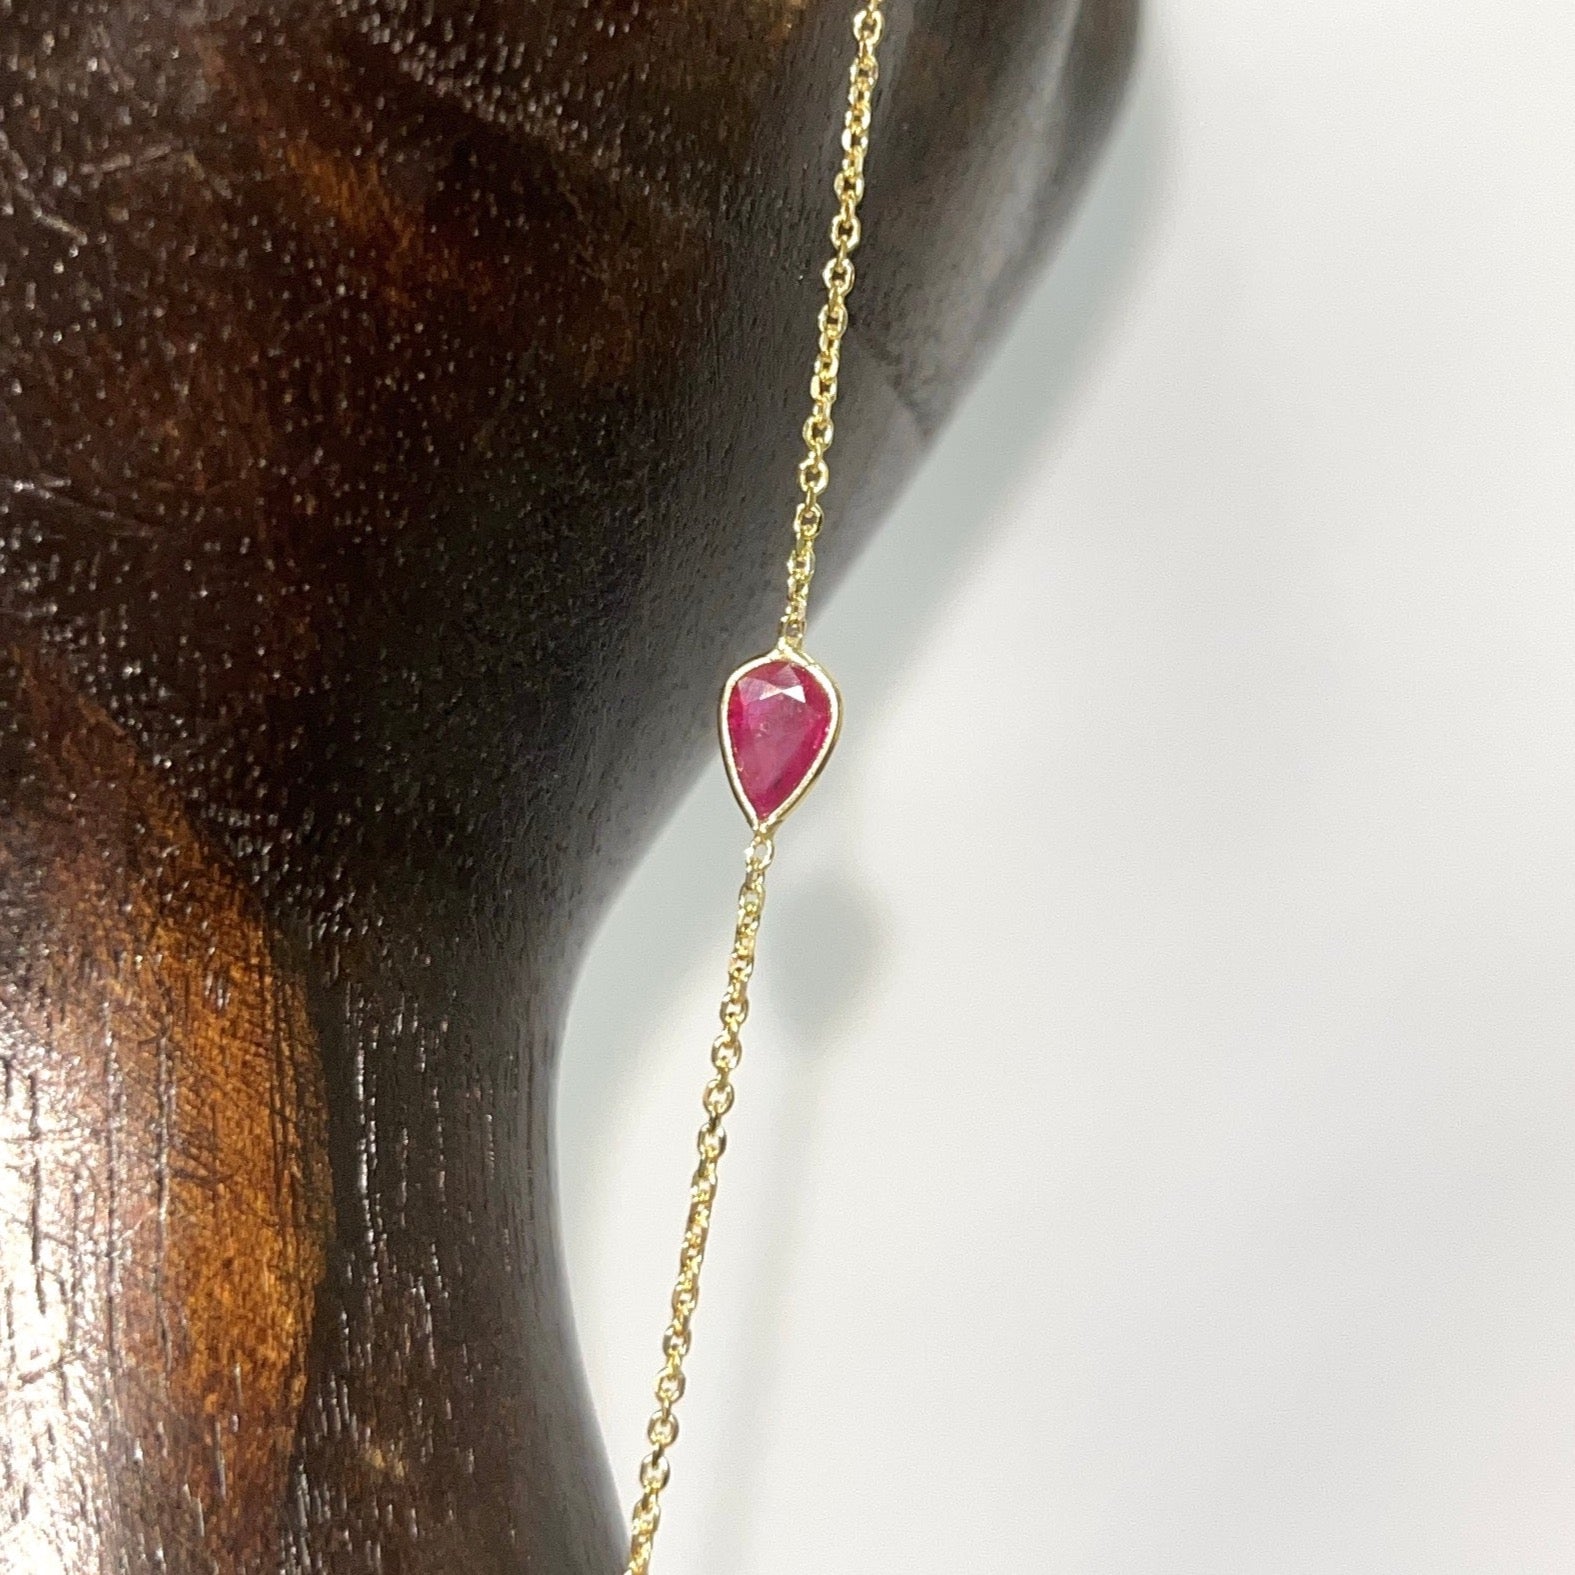 Pear Cut Ruby Hand Chain Bracelet in solid 14K Yellow Gold